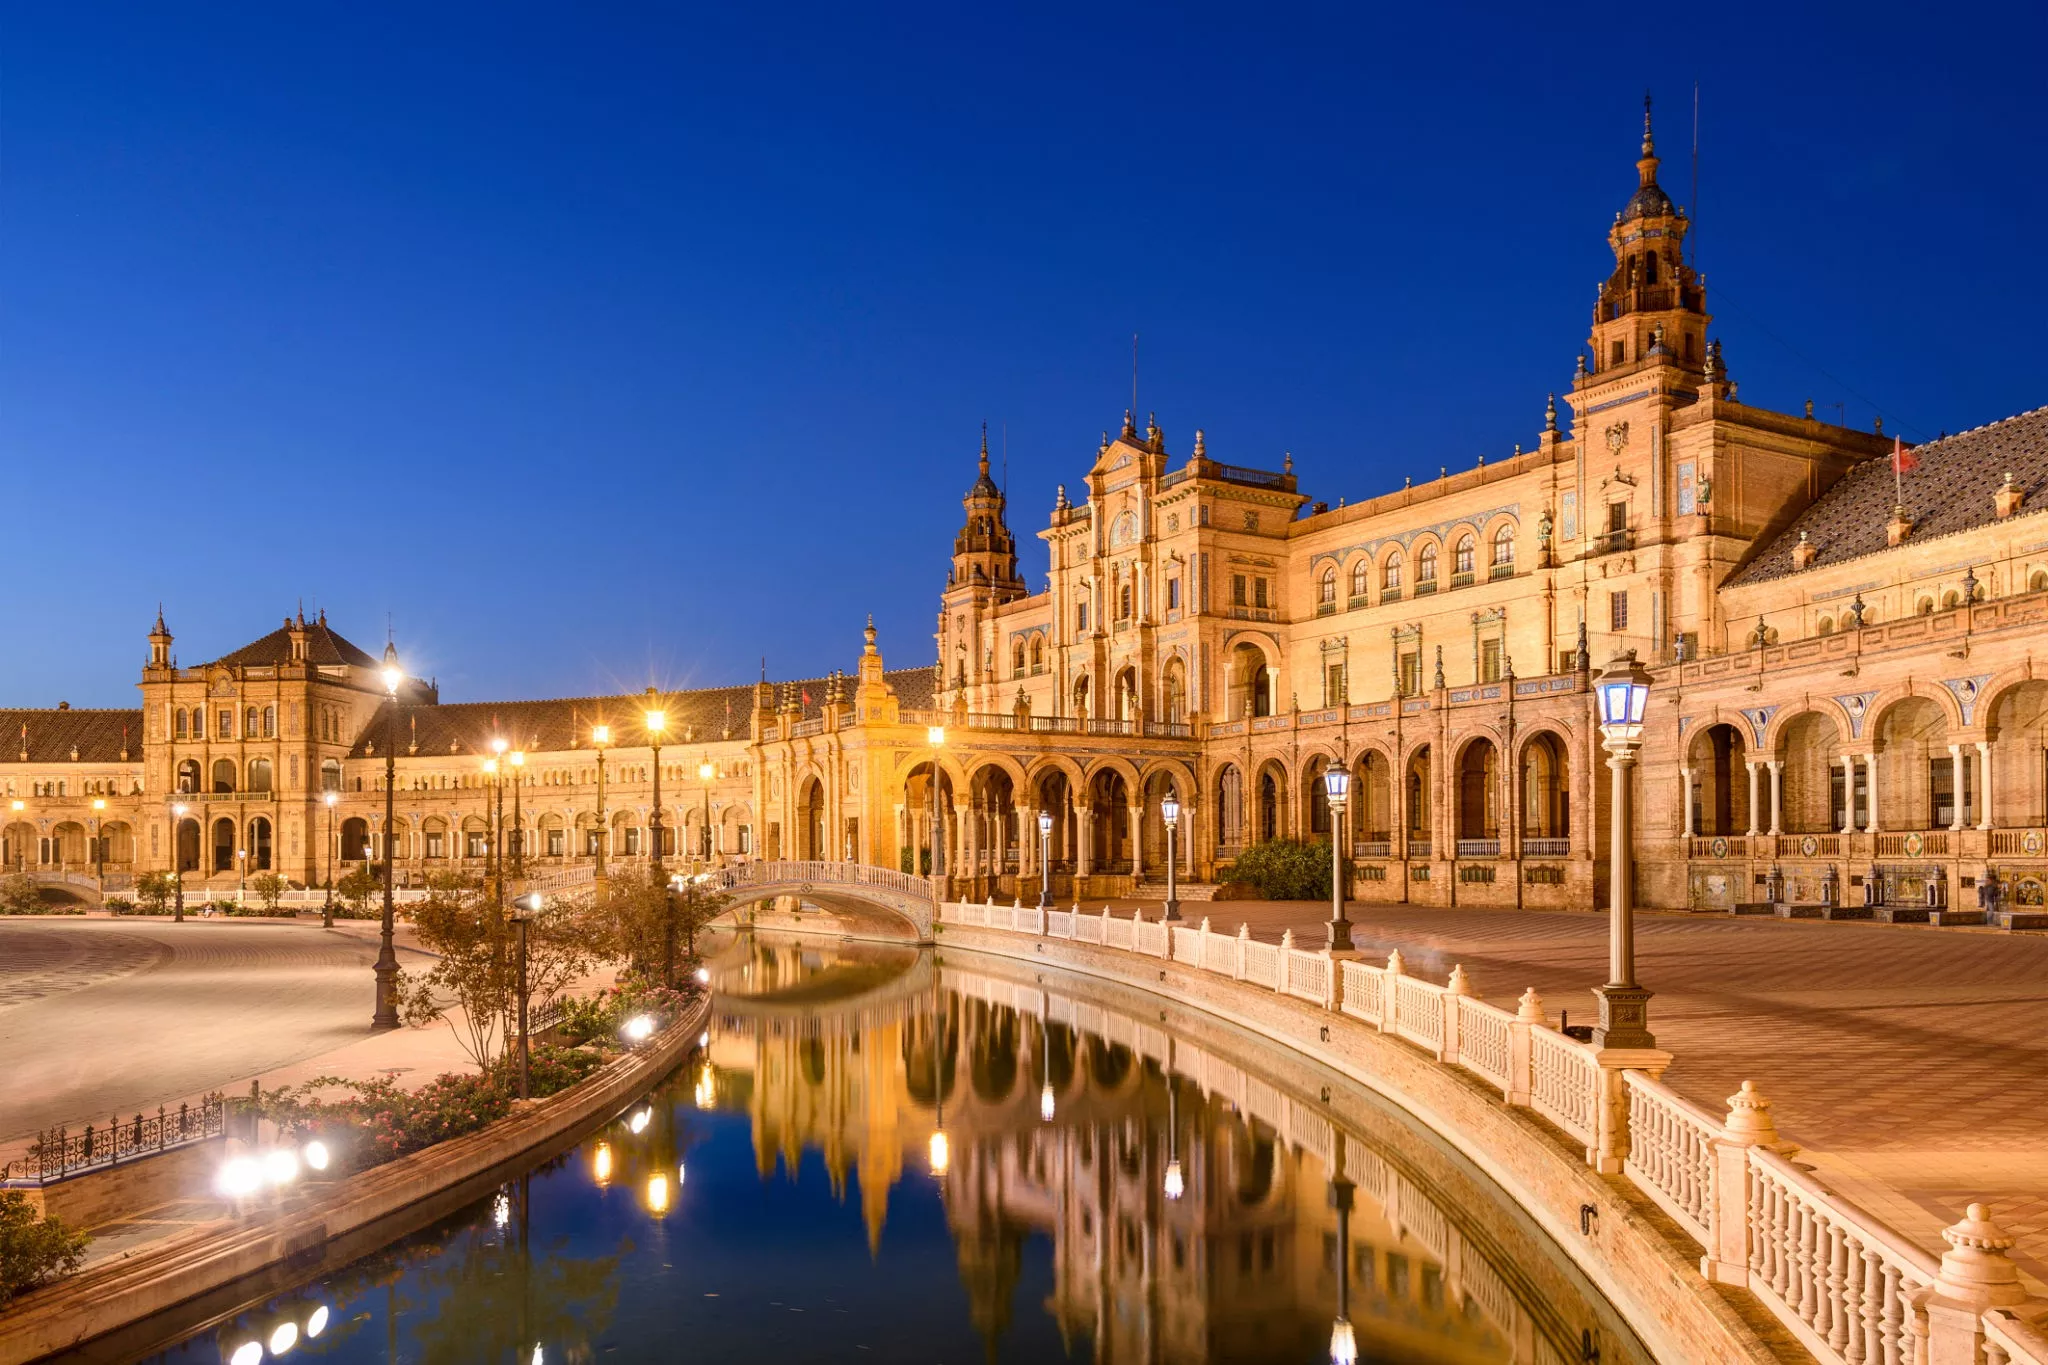 Spain Square in Spain, Europe | Architecture - Rated 6.1